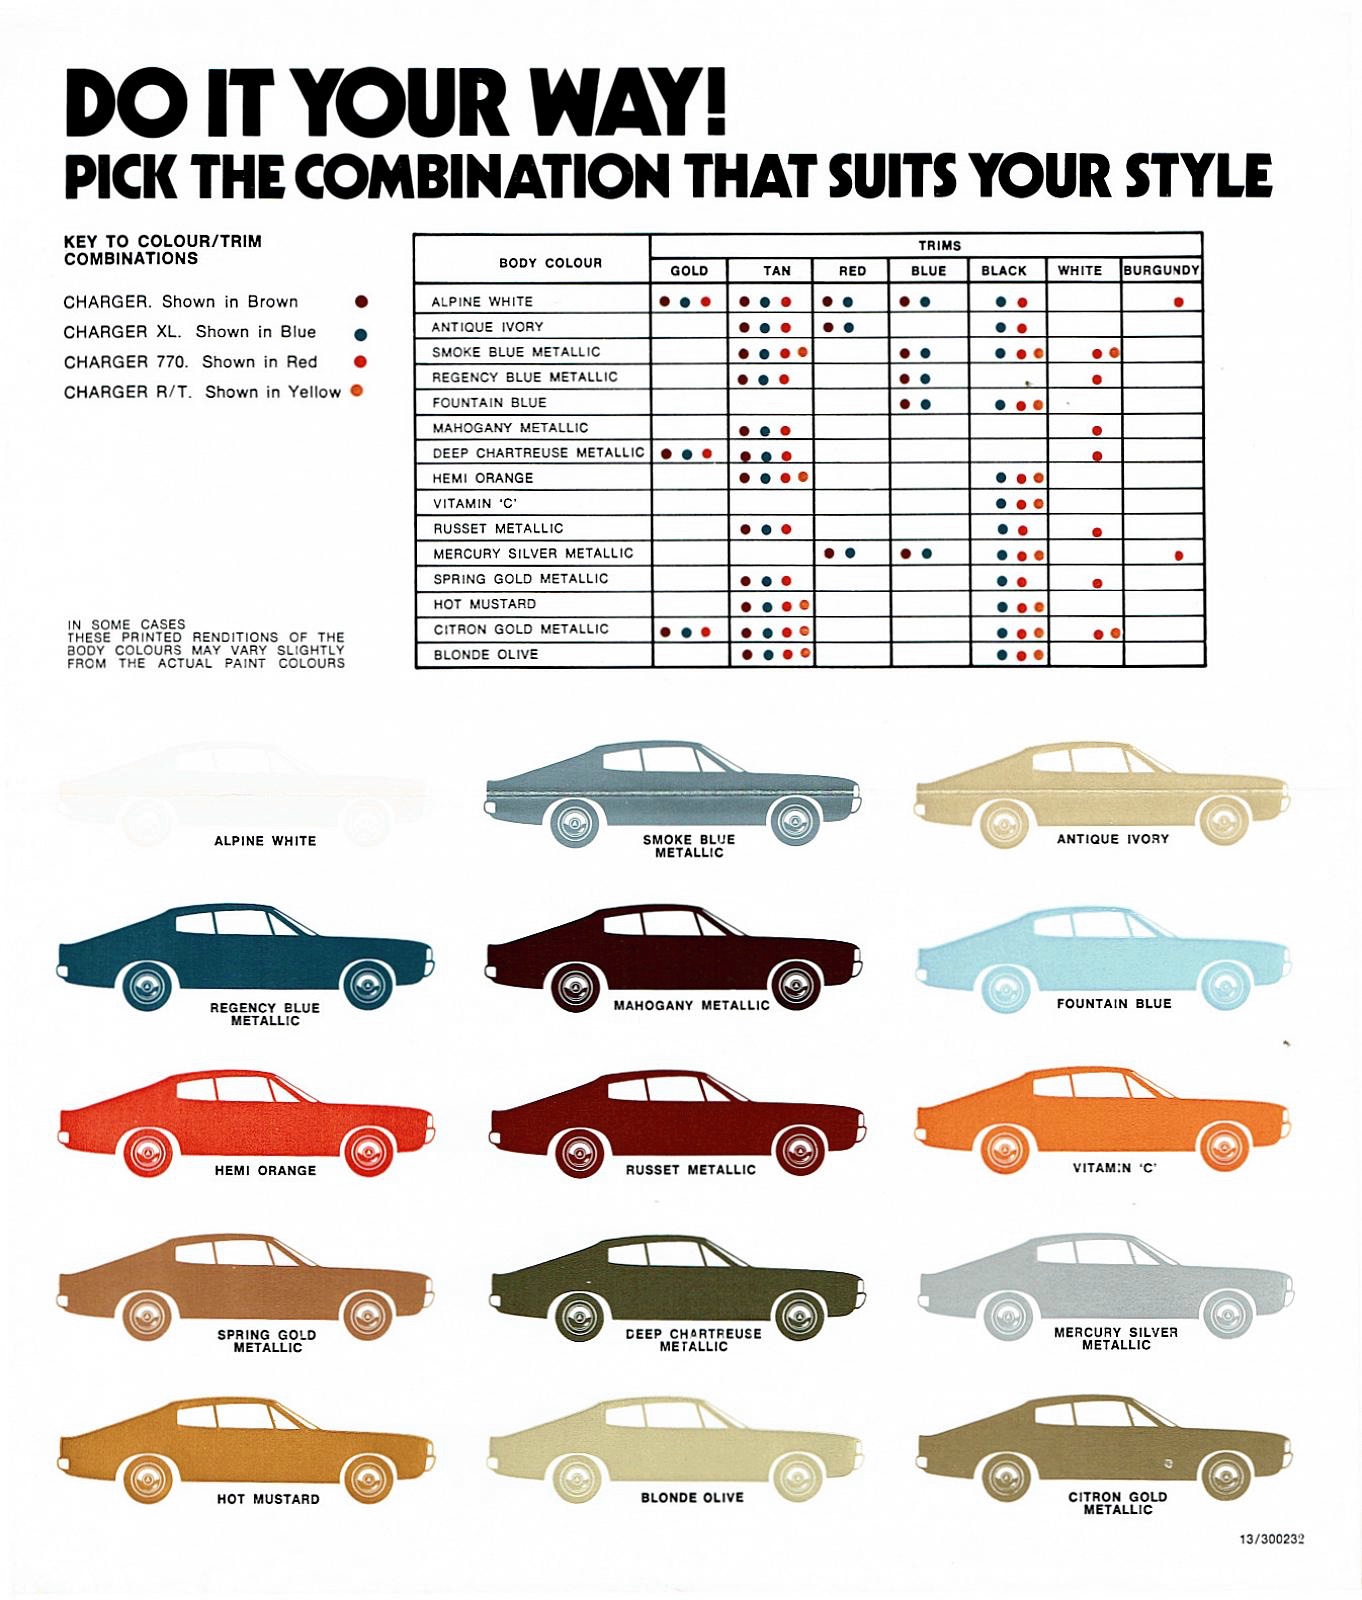 1971 Chrysler Valiant VH Charger Colour Chart Brochure Page 2